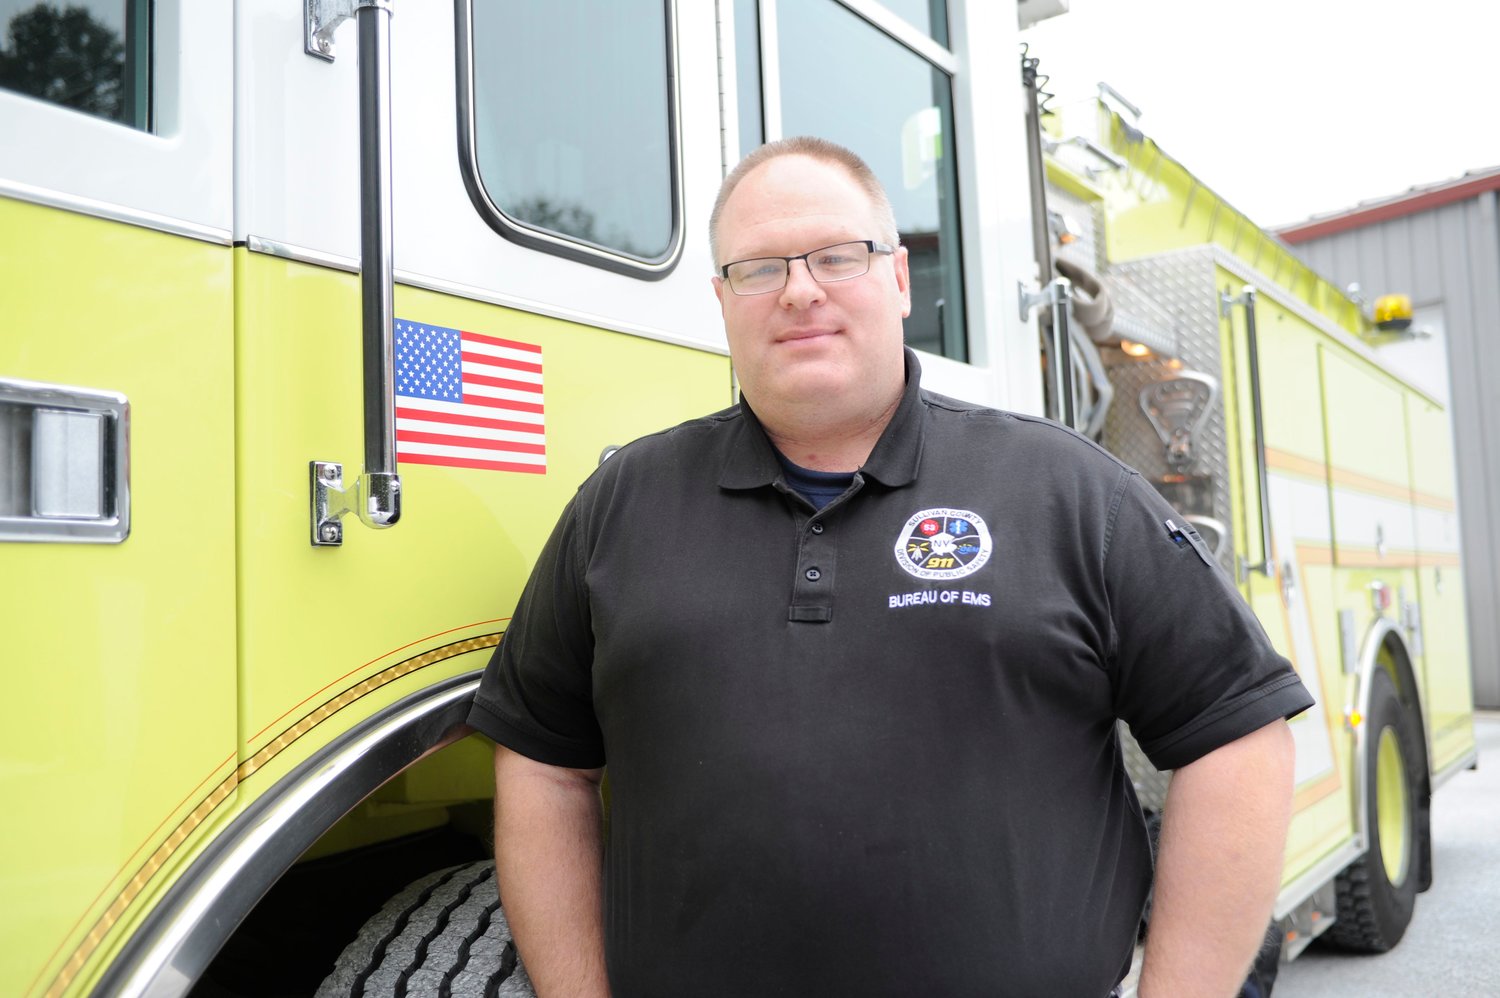 Alex Rau, Sullivan County E-911 and EMS coordinator, joined the Liberty Volunteer Ambulance Corps at the age of 16. “We have a great team of public safety people,” said Rau of the 911 Center that serves more than 70 agencies.